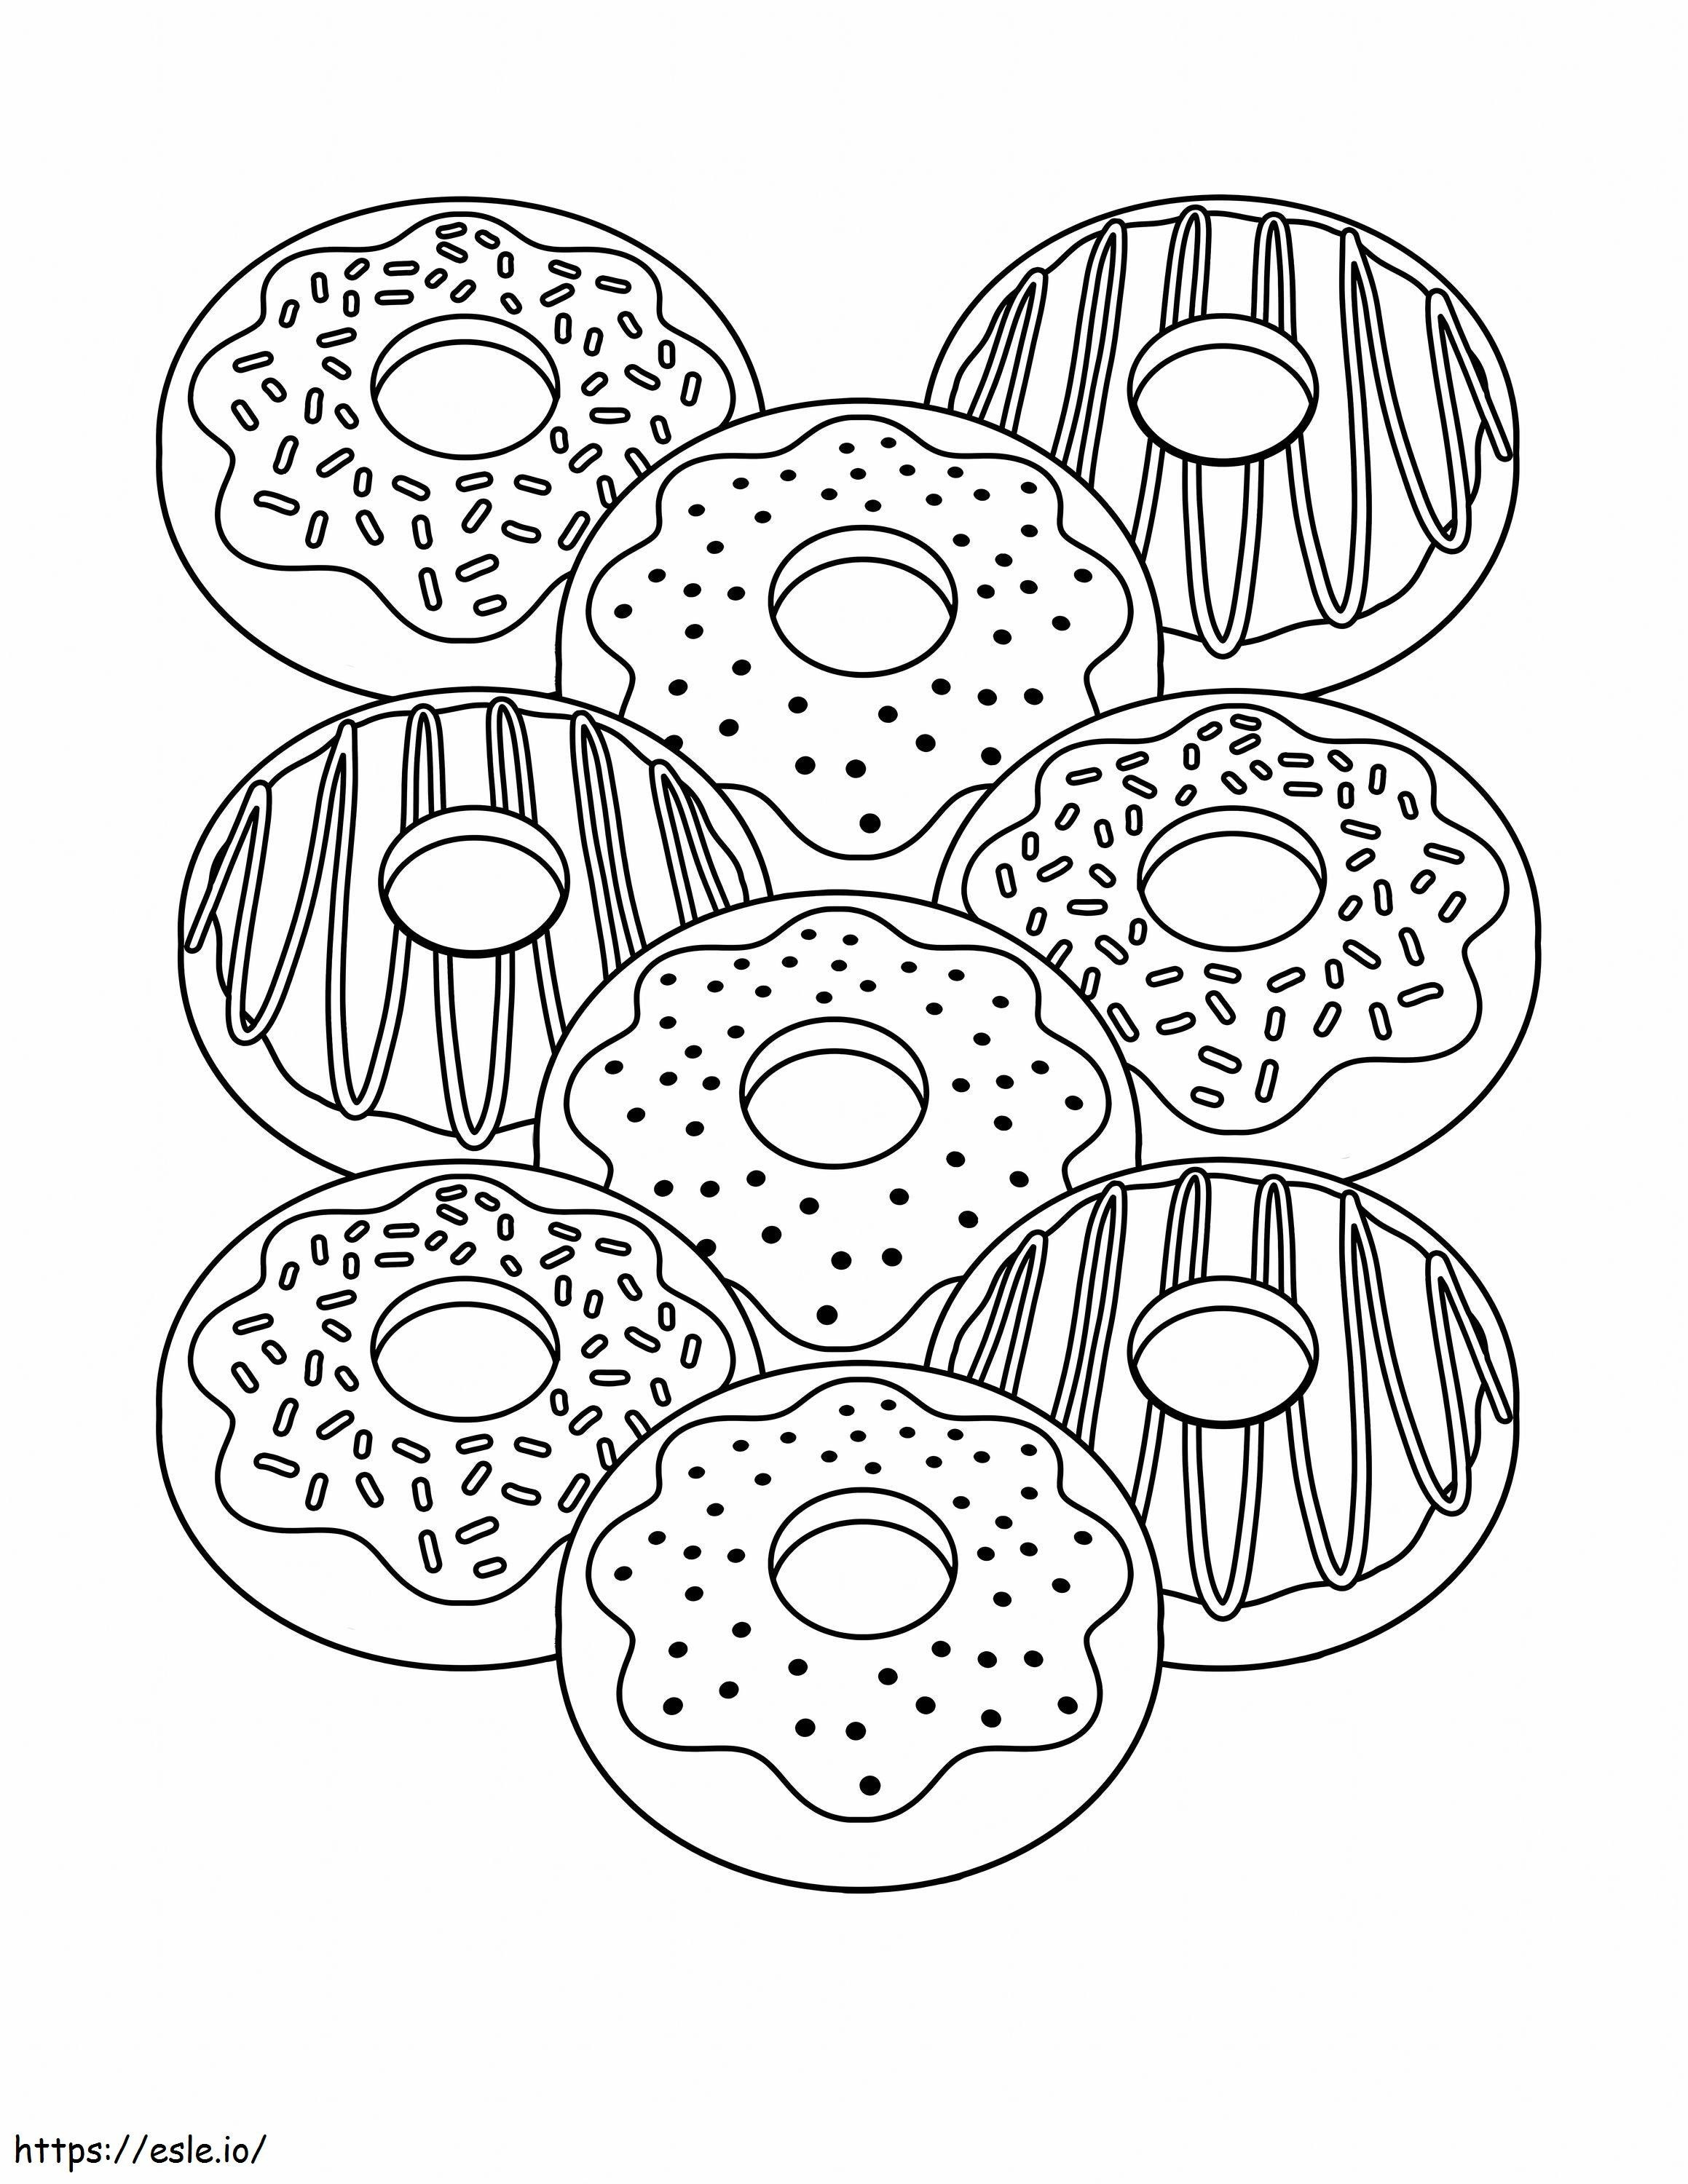 Nine Scaled Donuts coloring page